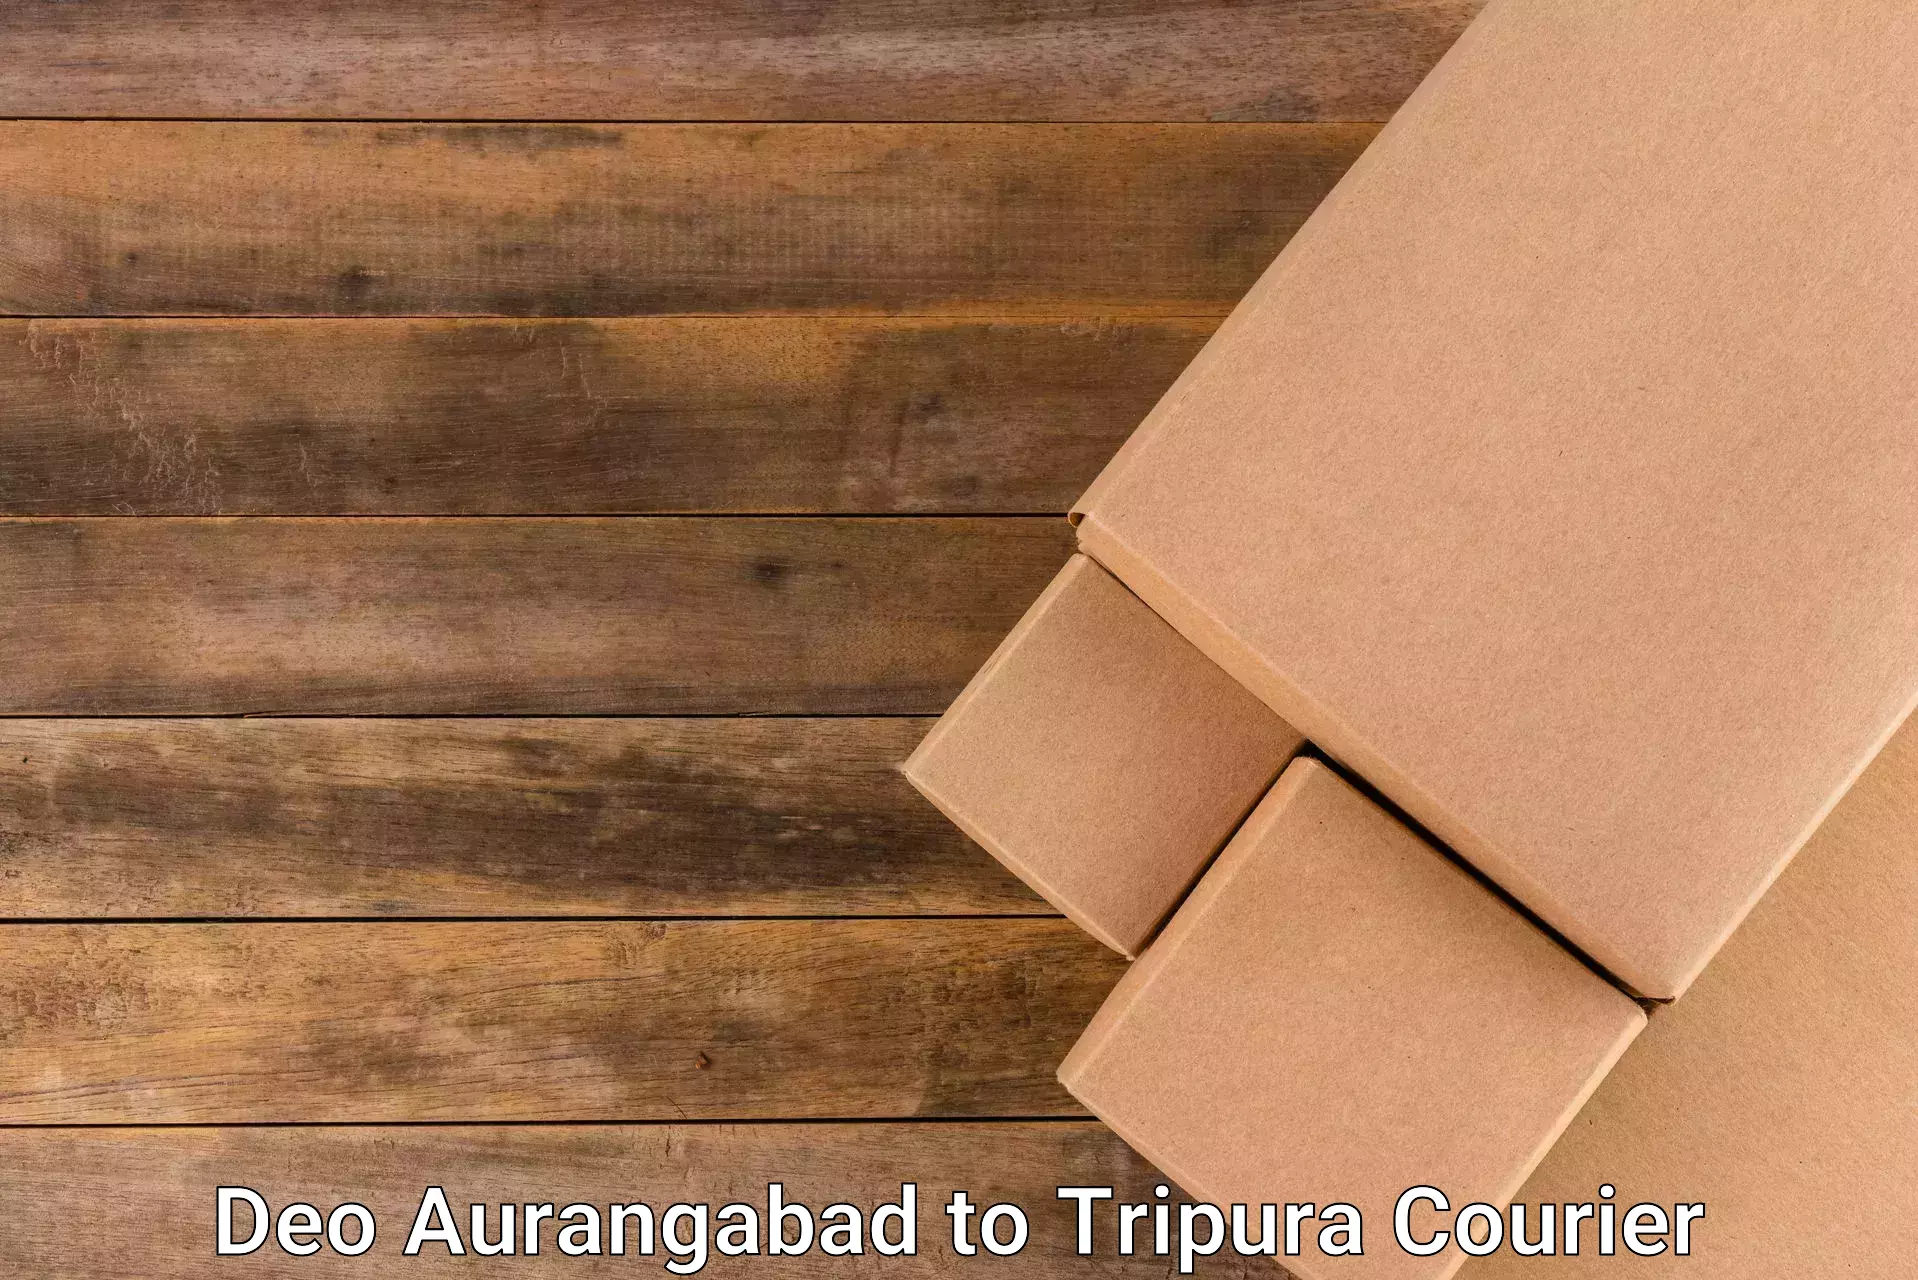 Special handling courier Deo Aurangabad to North Tripura